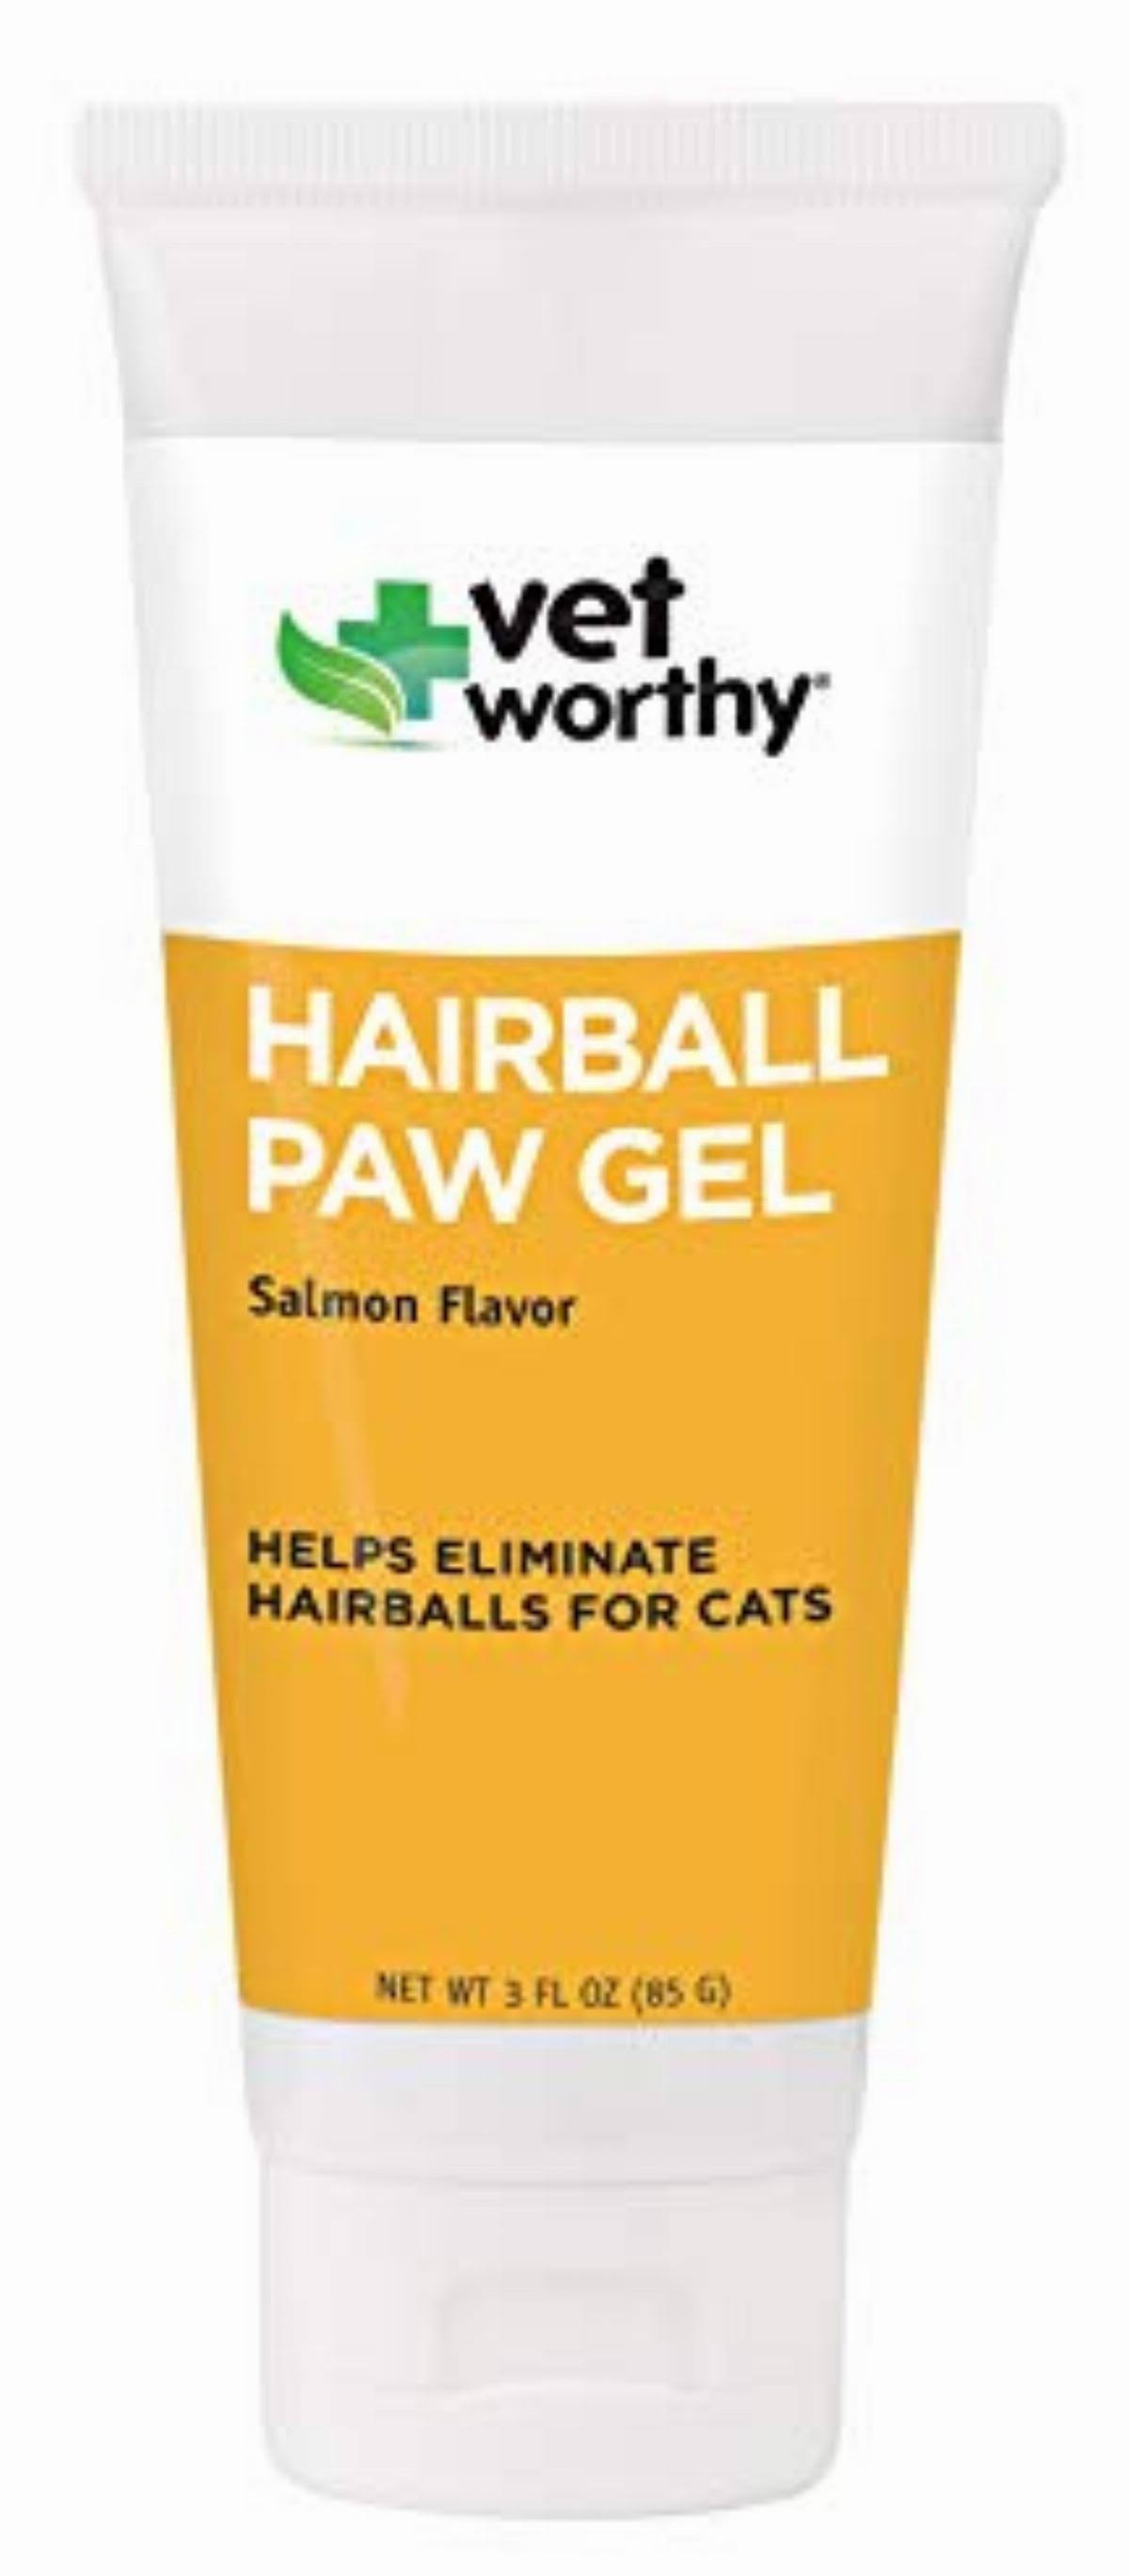 Vet Worthy Hairball Paw Gel Aid - For Cats, Fish Flavor, 3oz